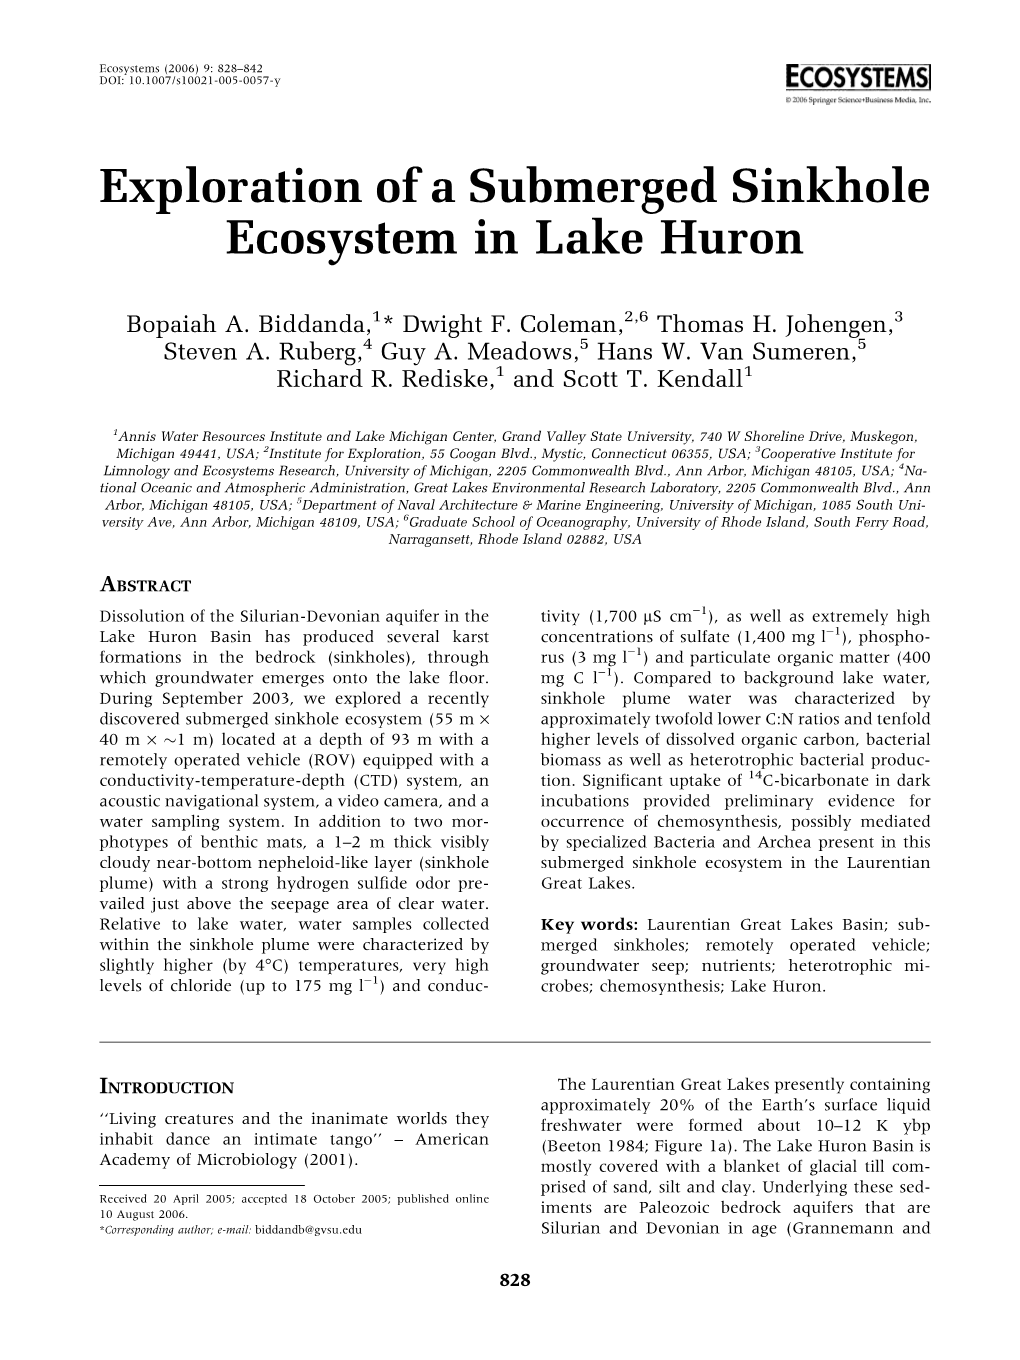 Exploration of a Submerged Sinkhole Ecosystem in Lake Huron